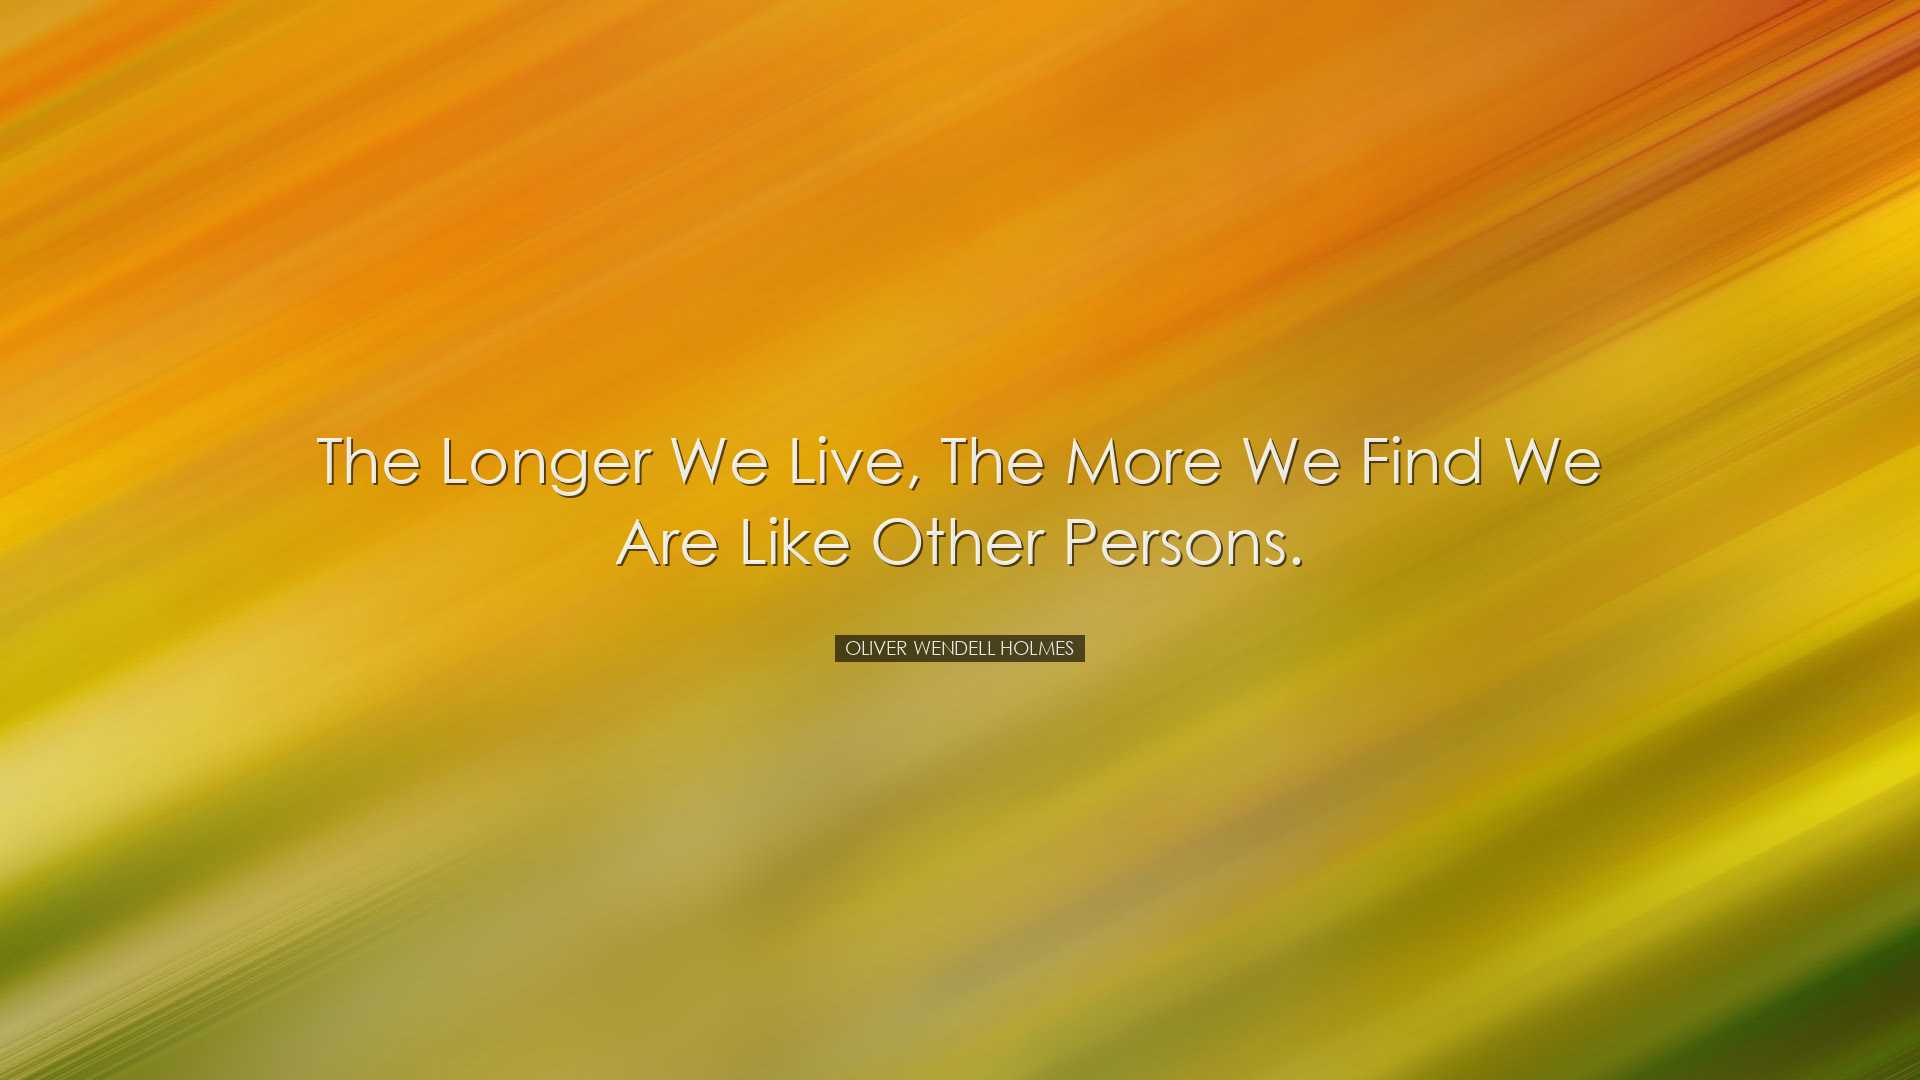 The longer we live, the more we find we are like other persons. -